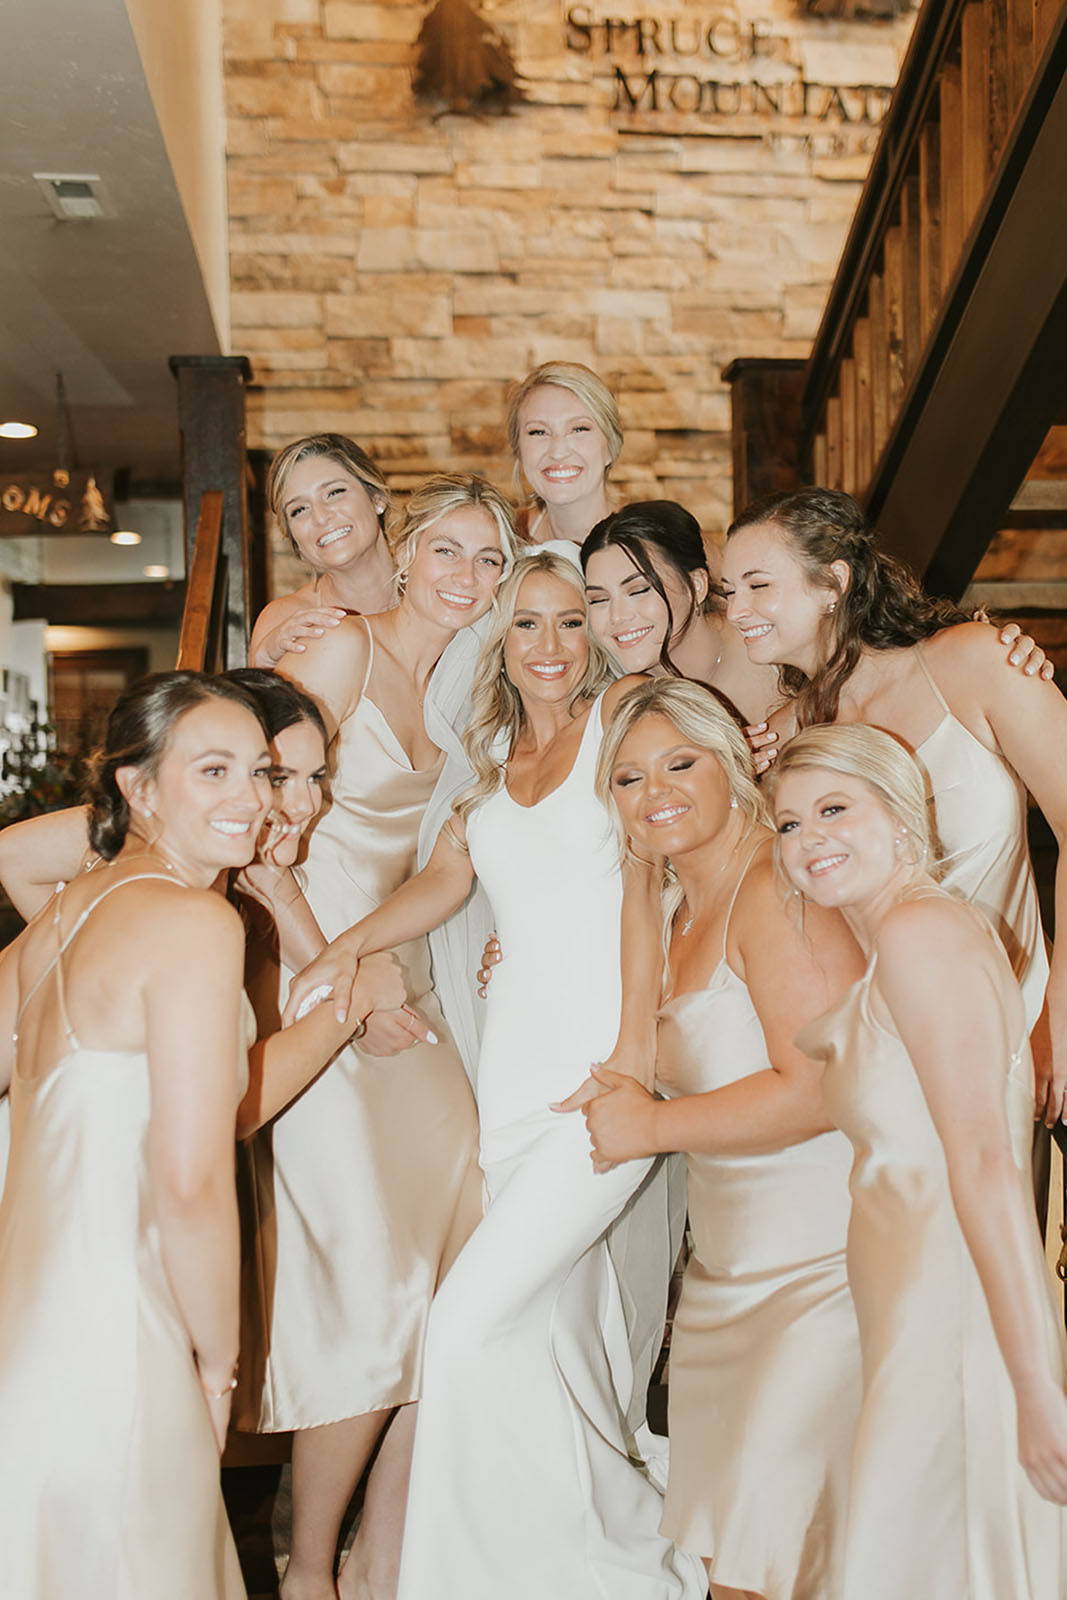 The stunning bride strikes a graceful pose, surrounded by her beaming bridesmaids